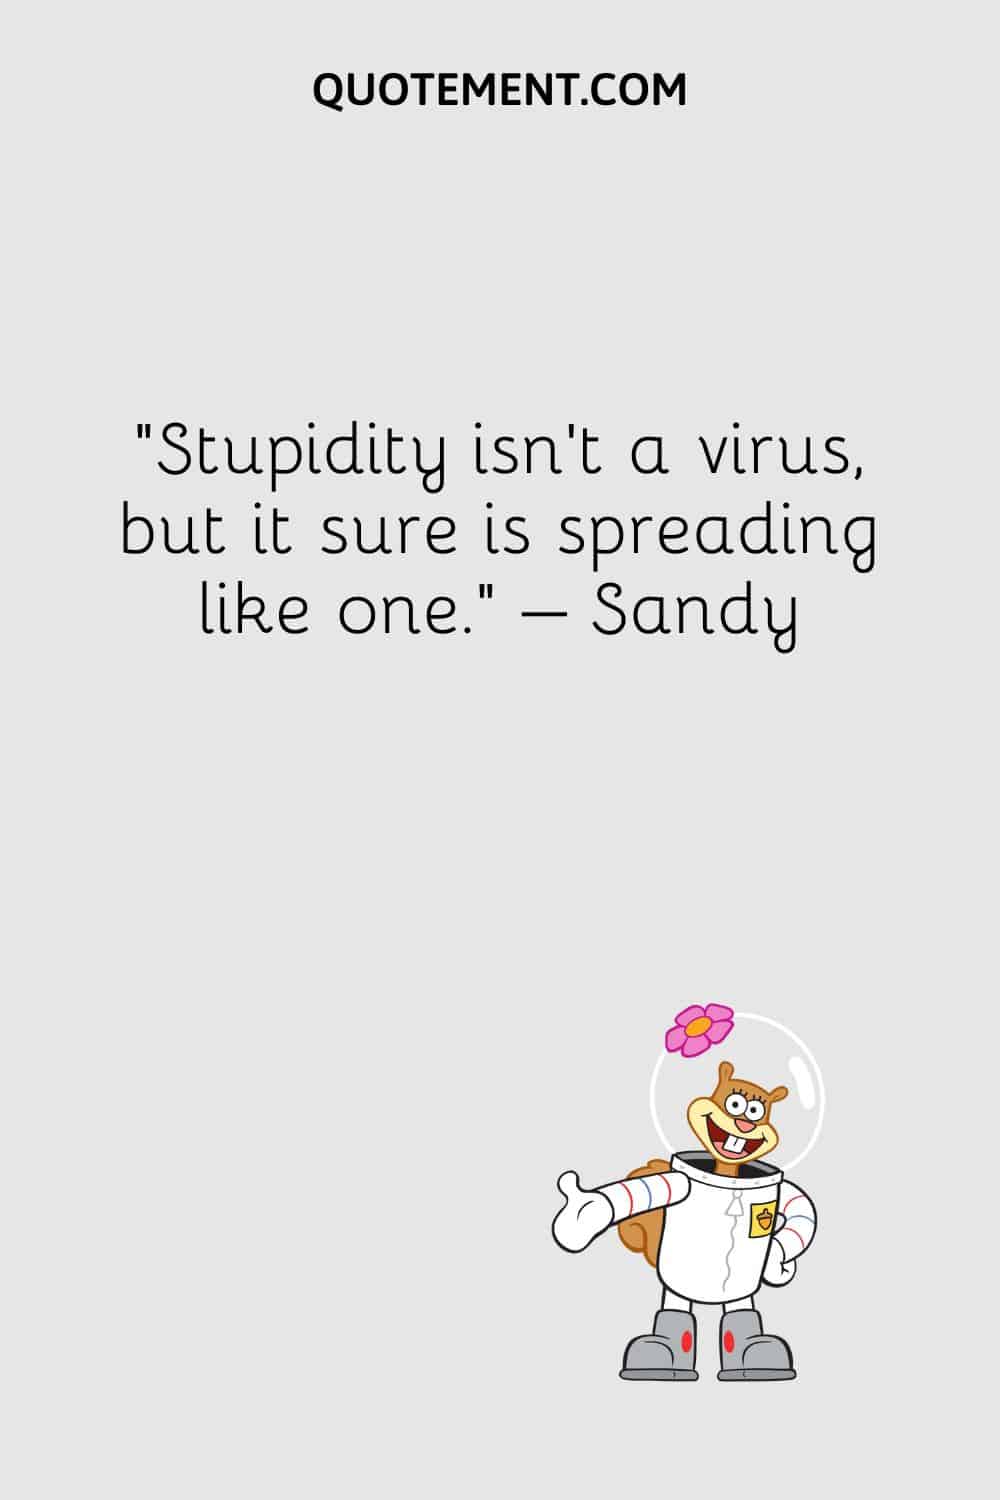 “Stupidity isn’t a virus, but it sure is spreading like one.” – Sandy